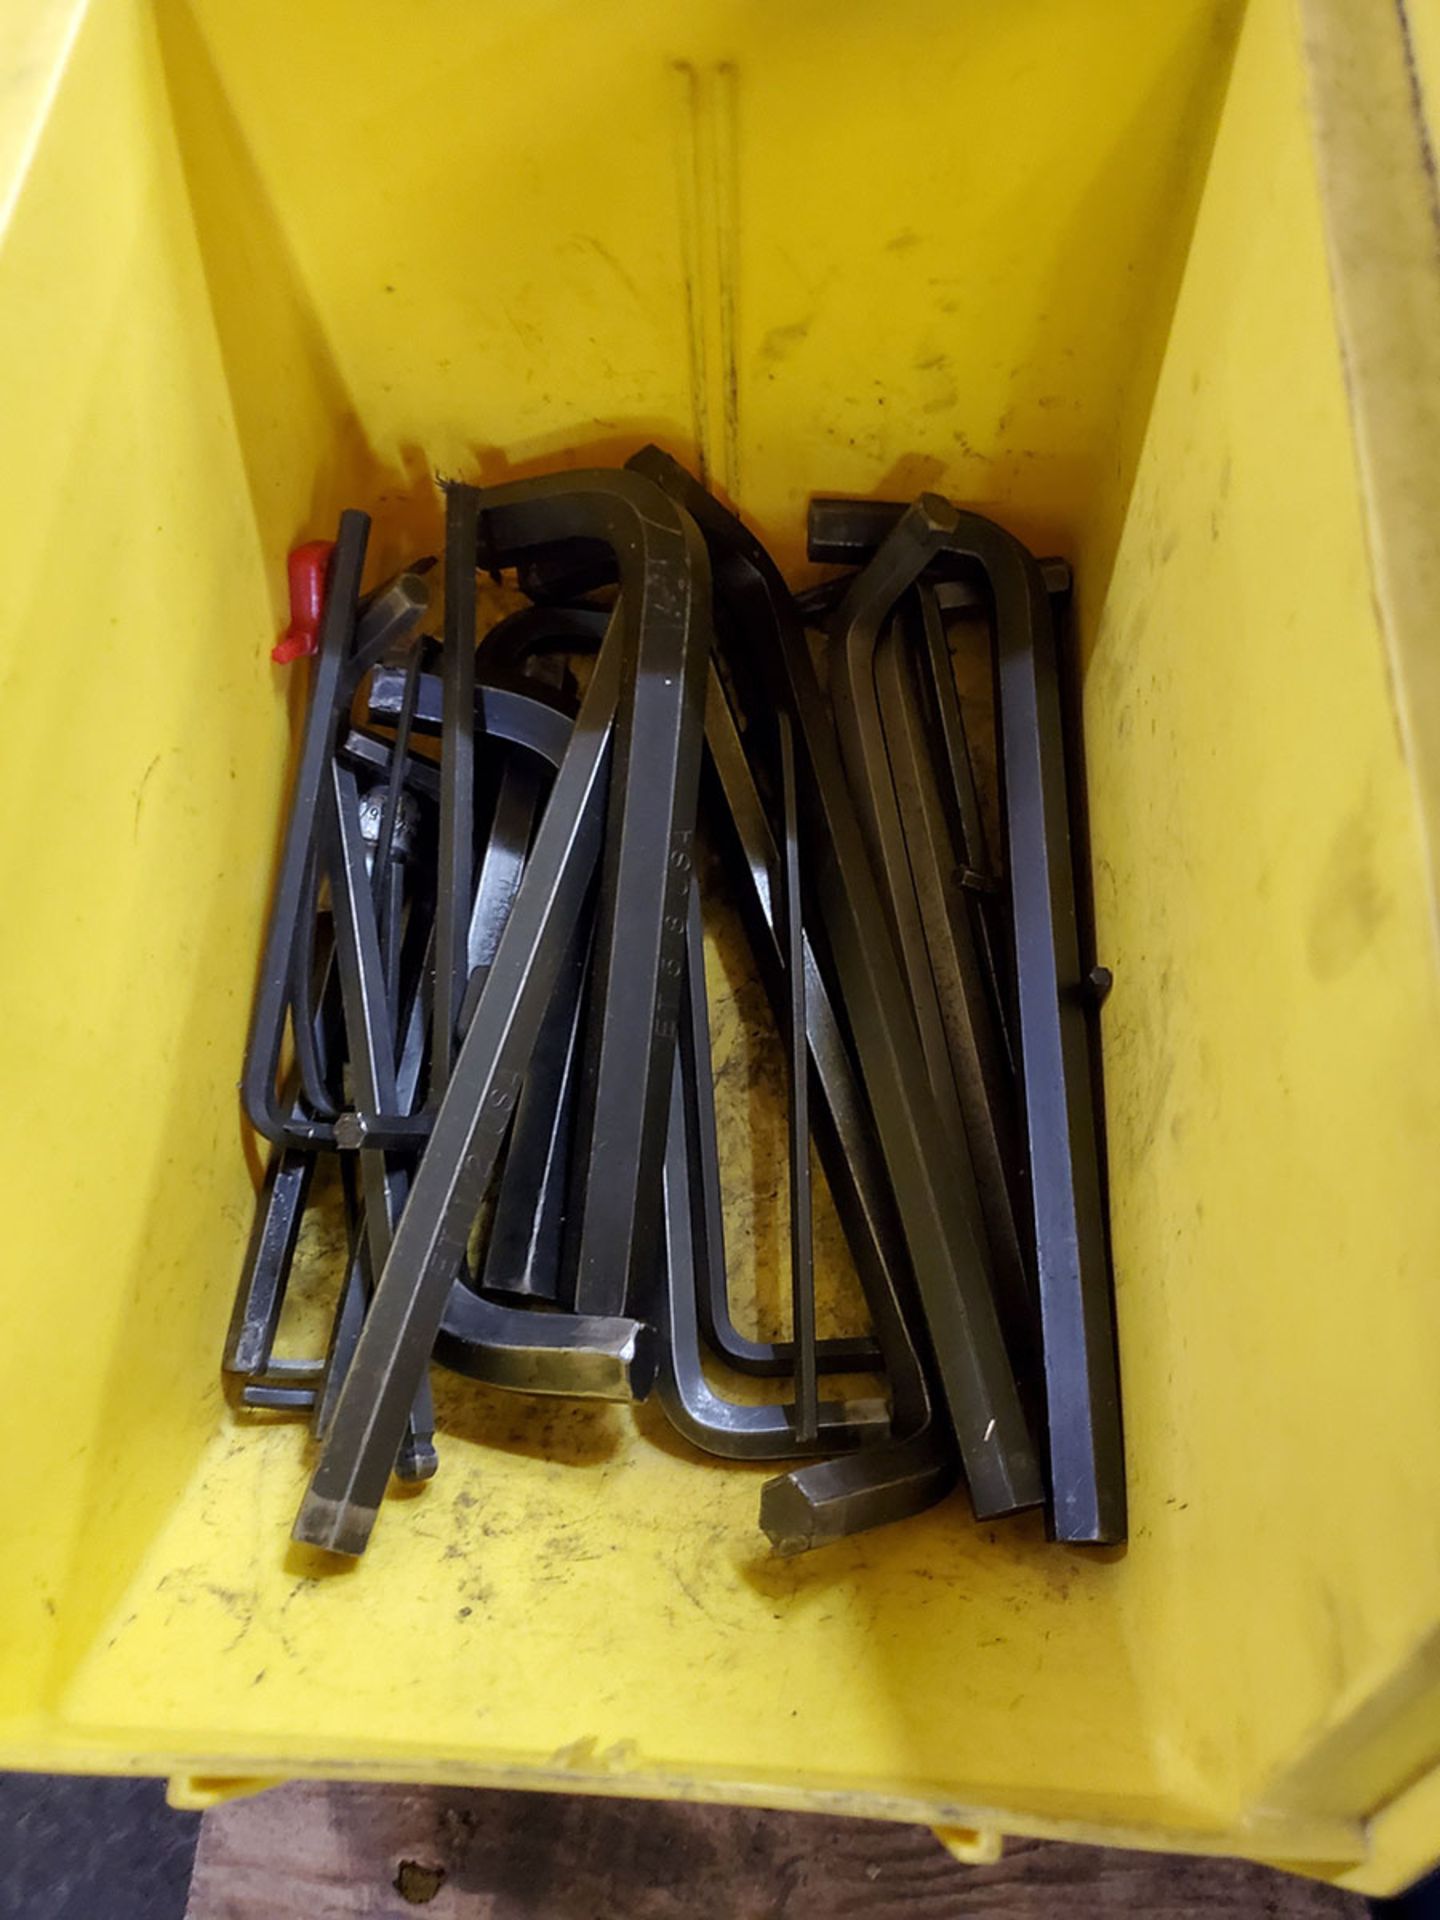 (3) BOXES OF 24’’ CREATOLOGY CRESCENT WRENCH, ALLEN WRENCHES, RUBBER MALLETS, OPEN/CLOSED END - Image 2 of 10